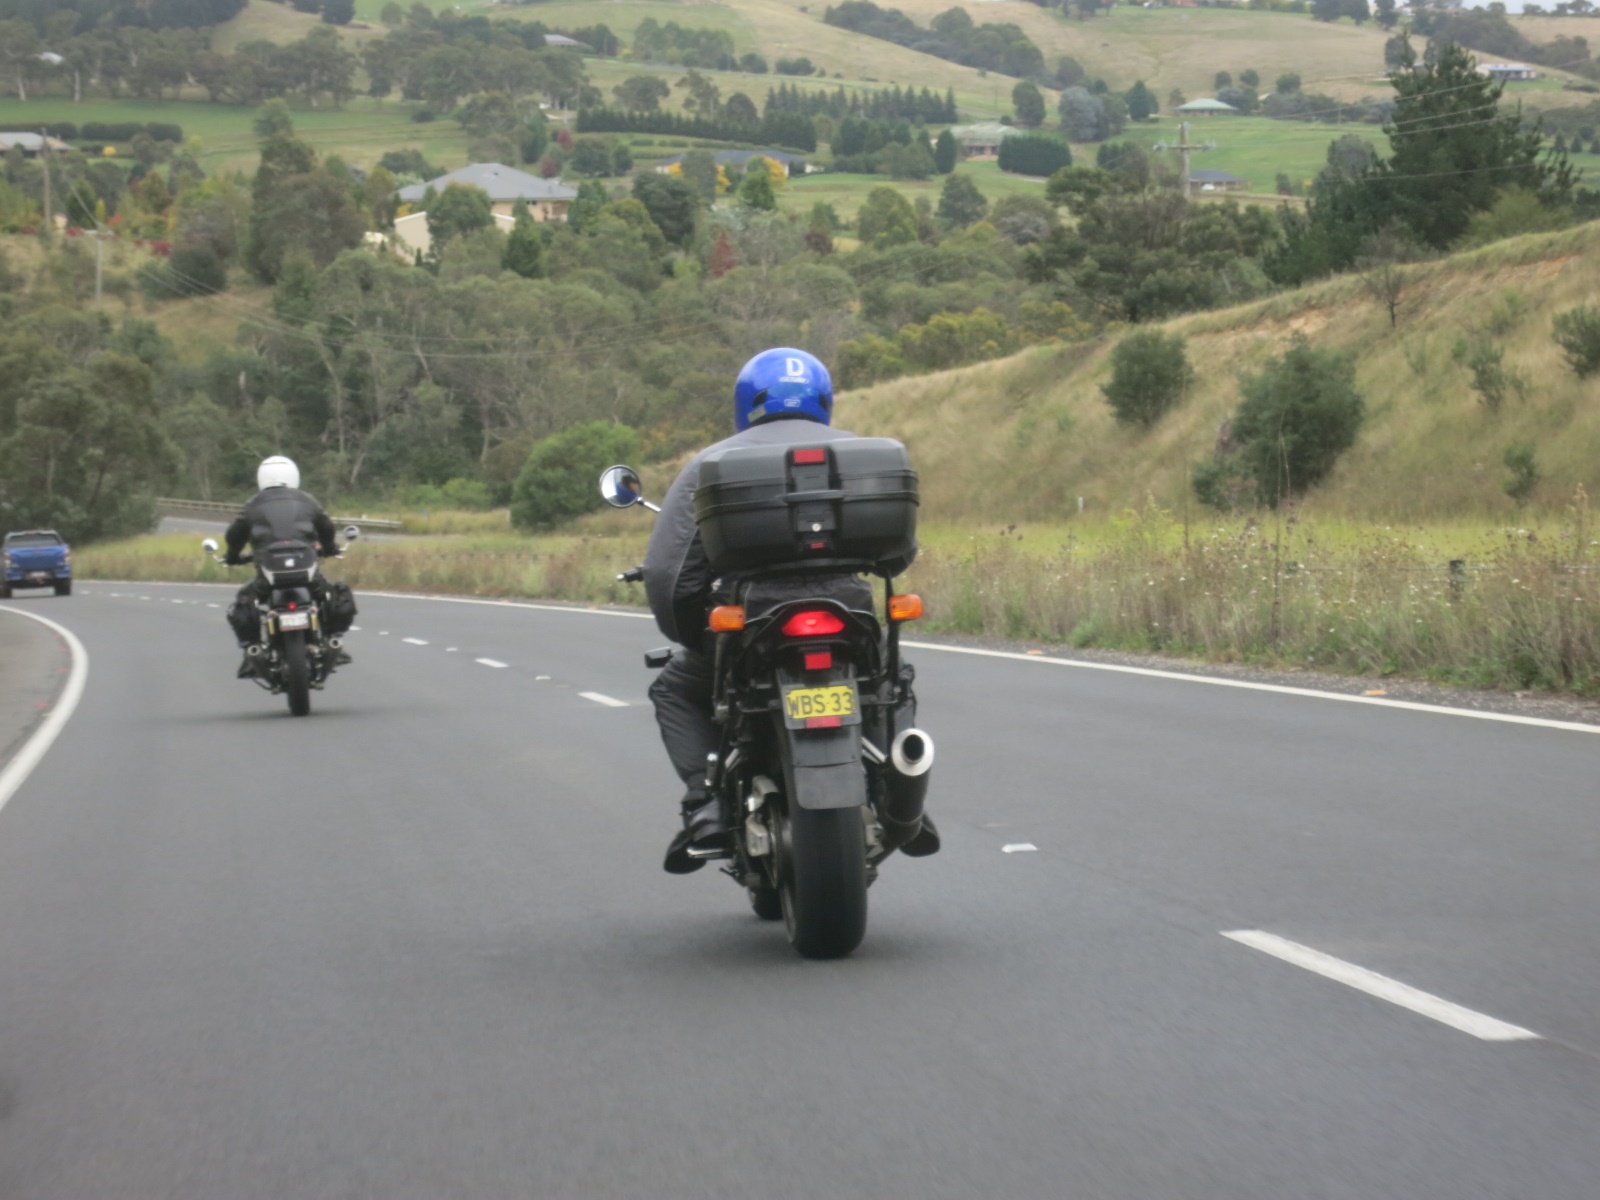 Two people riding motorcycles on a road

Description automatically generated with low confidence